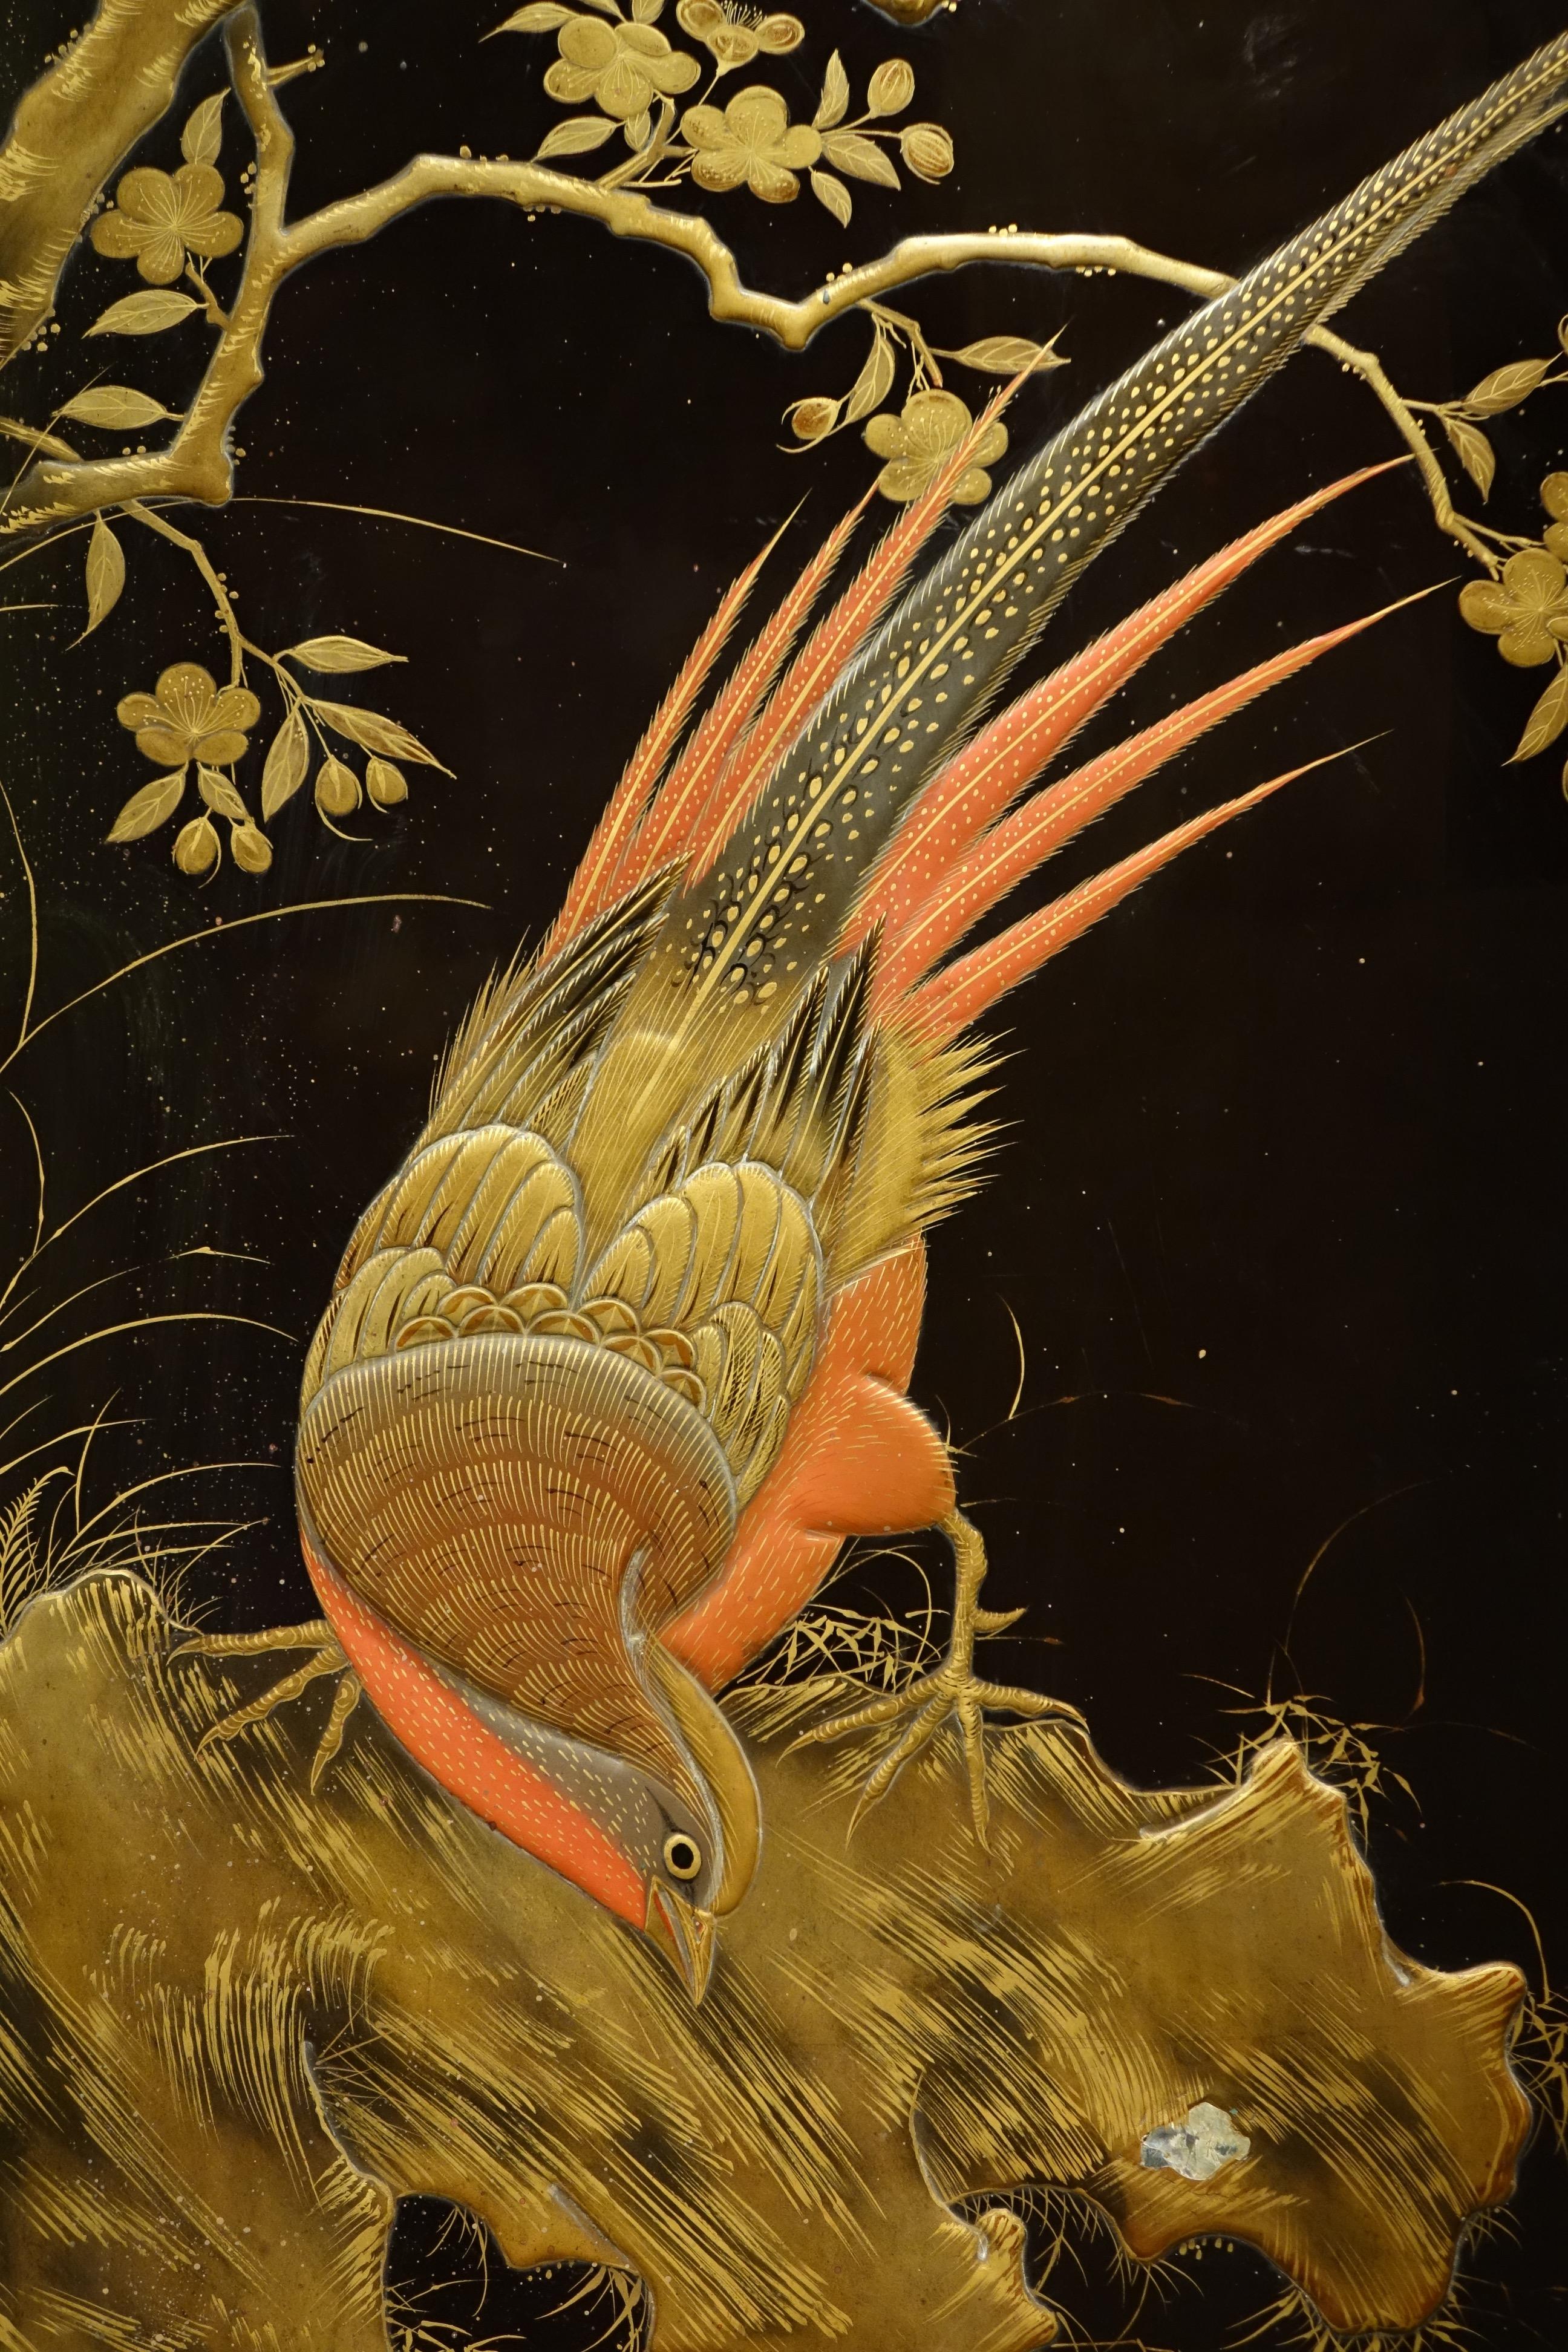 Four leaf screen in lacquer from Japan, circa 1900, Meiji period.
Screen with four leaves in lacquer of Japan, with animal decoration, representing different birds (ducks, cranes, kingfishers) in their natural element, watched by an eagle perched on